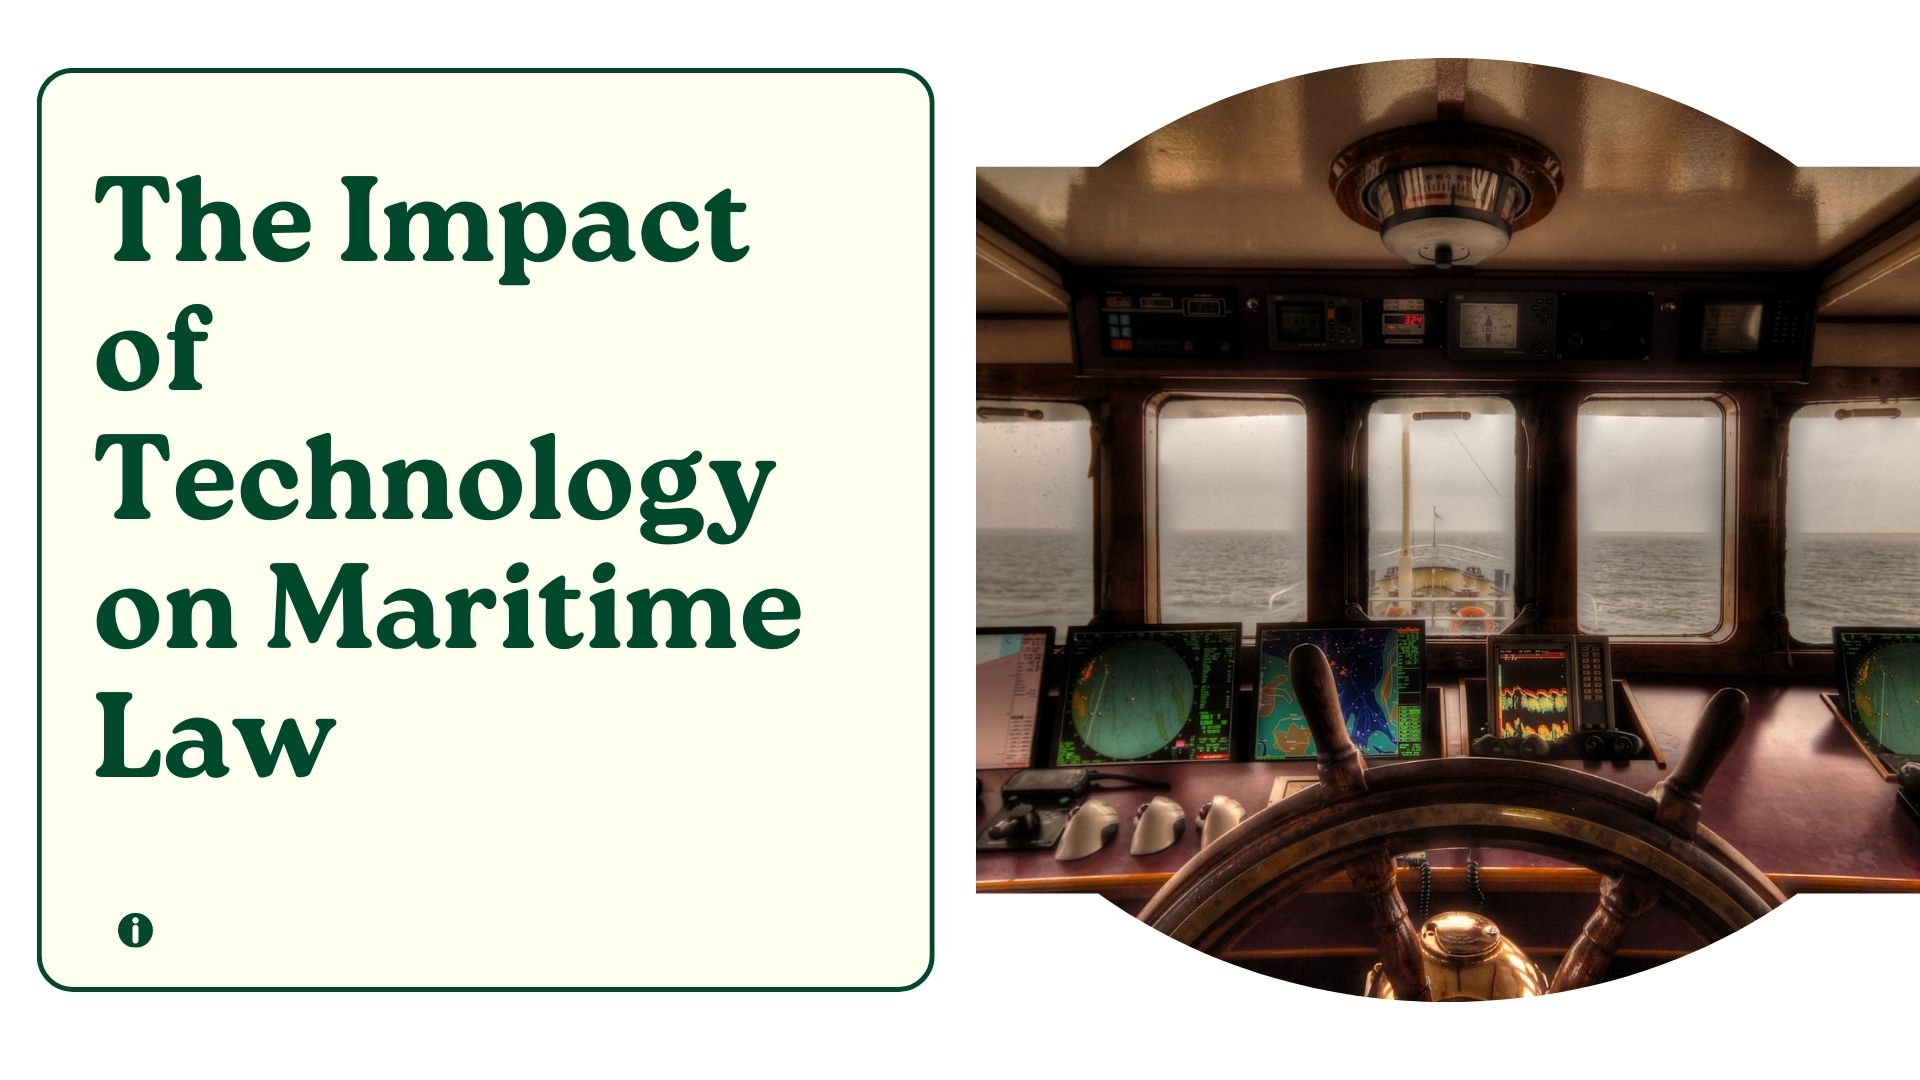 The Impact of Technology on Maritime Law